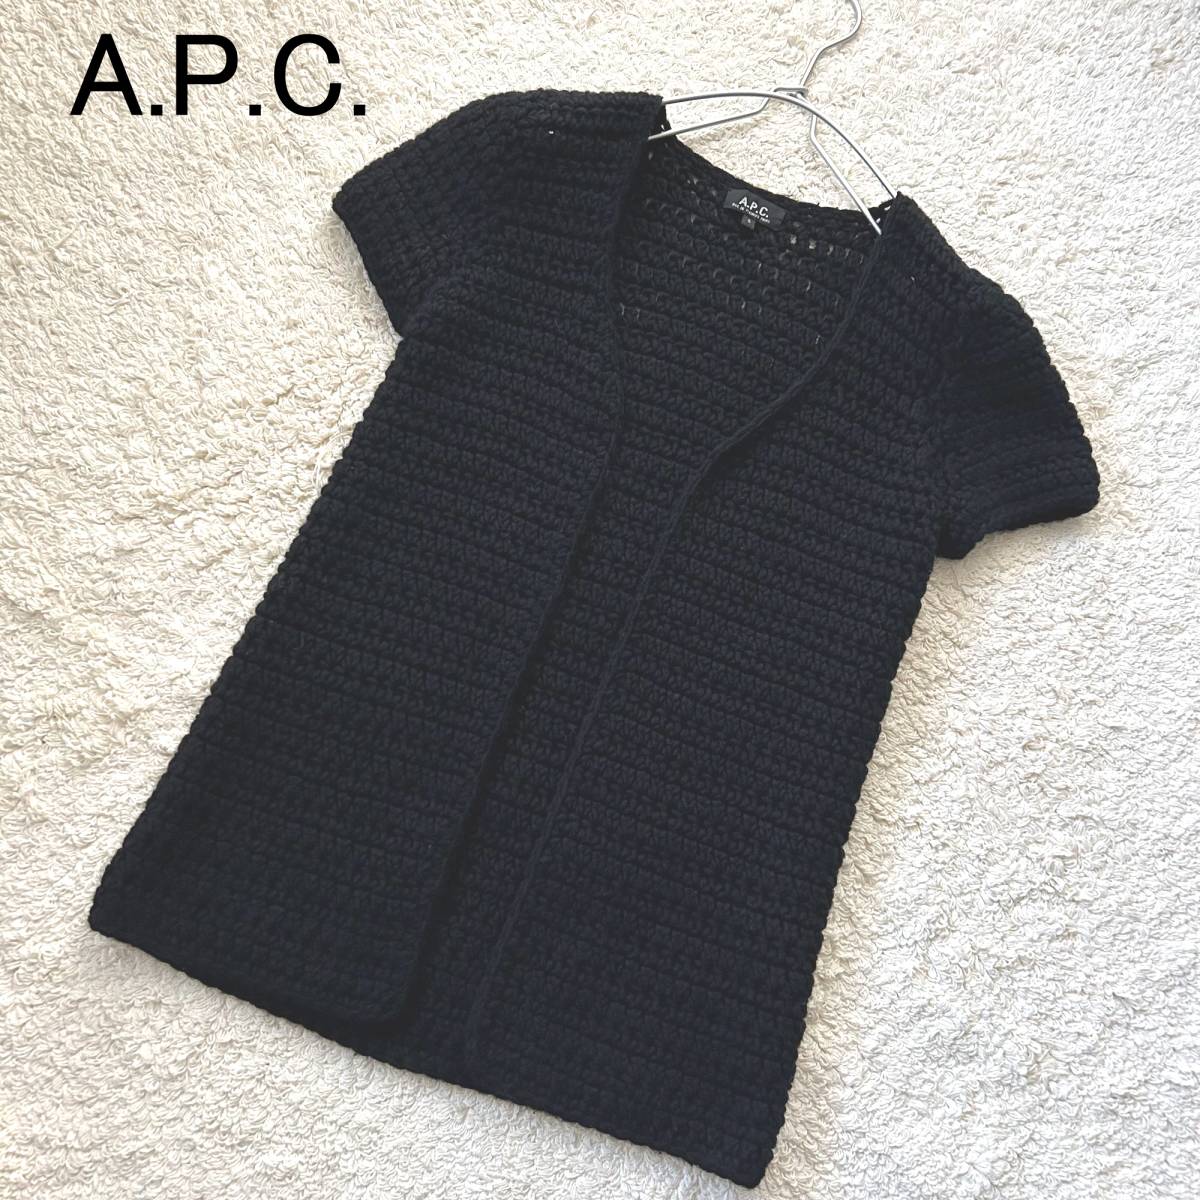 A.P.C. A.P.C. Anne gola. hand-knitted cardigan the best piling put on black size S...